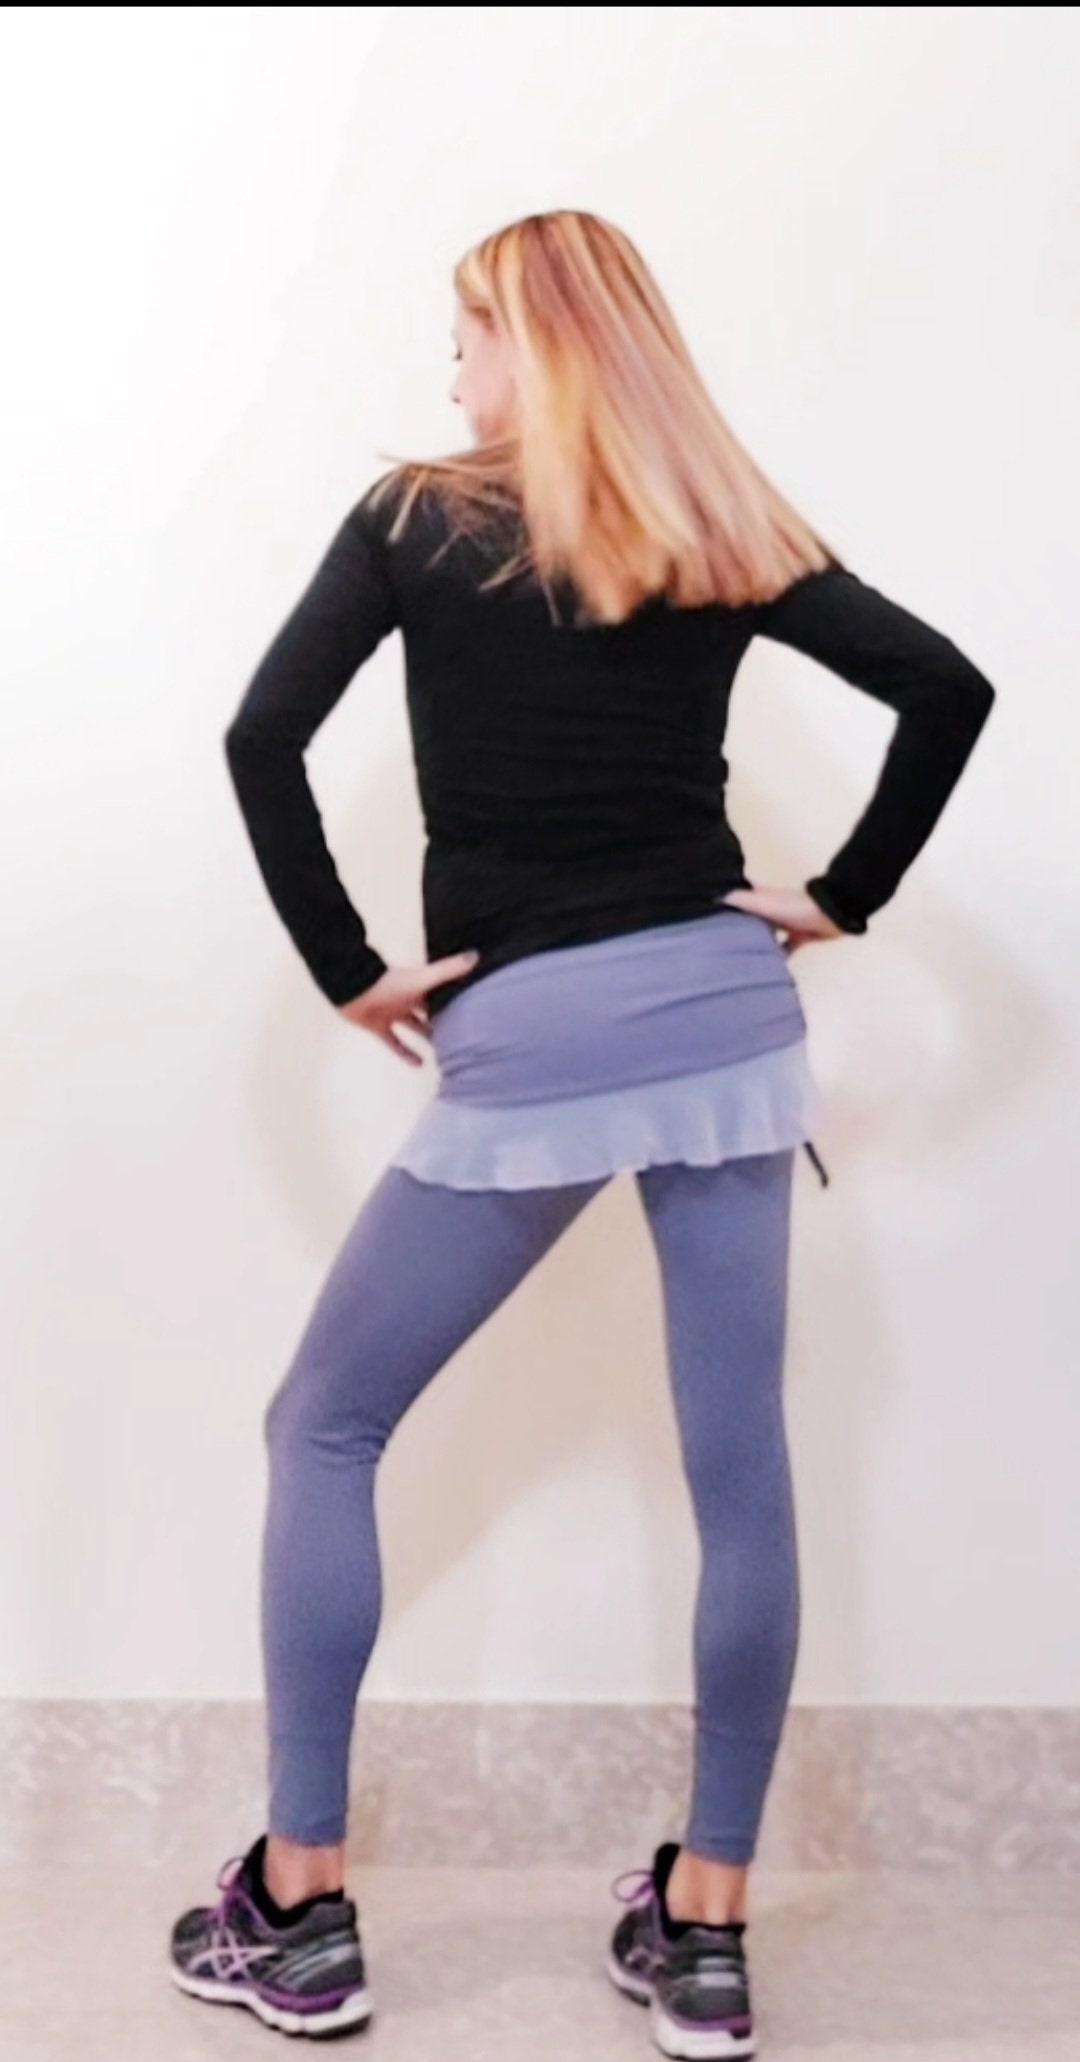 Skeggings: Leggings With Integrated Slit Skirt and Elastic Tulle Flounce,  for Tennis, Paddle, With Ball Pocket. 